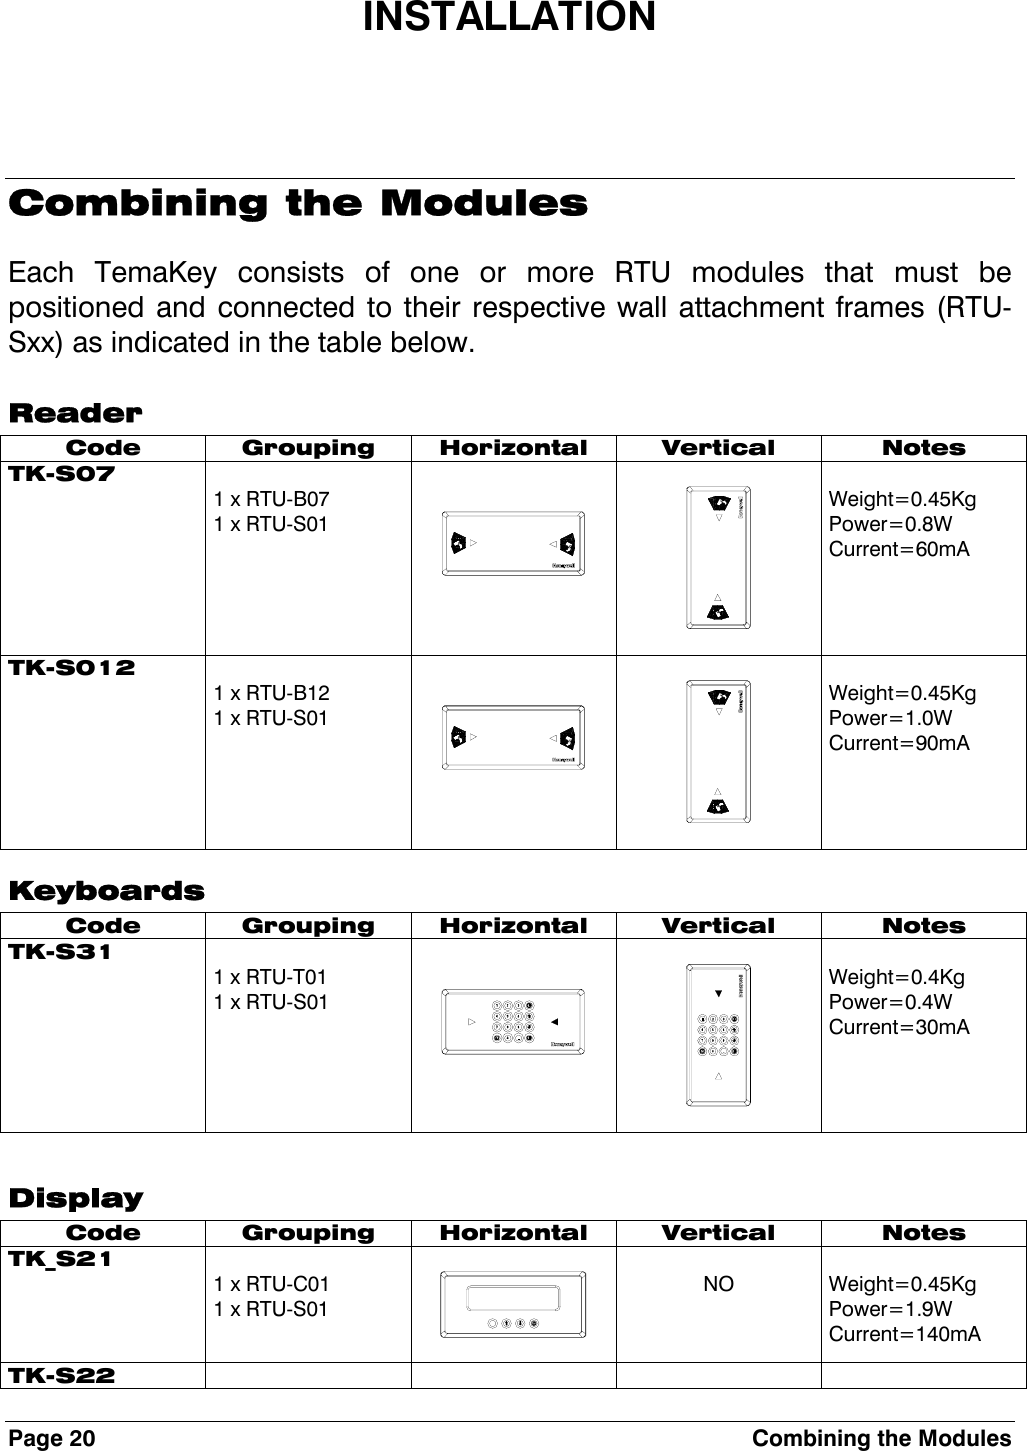 Page 20  Combining the Modules INSTALLATION Combining the Modules Each TemaKey consists of one or more RTU modules that must be positioned and connected to their respective wall attachment frames (RTU-Sxx) as indicated in the table below. Reader Code Grouping Horizontal Vertical  Notes TK-S07  1 x RTU-B07 1 x RTU-S01           Weight=0.45Kg Power=0.8W Current=60mA TK-S012  1 x RTU-B12 1 x RTU-S01           Weight=0.45Kg Power=1.0W Current=90mA Keyboards Code Grouping Horizontal Vertical  Notes TK-S31   1 x RTU-T01 1 x RTU-S01           Weight=0.4Kg Power=0.4W Current=30mA  Display Code Grouping Horizontal Vertical  Notes TK_S21  1 x RTU-C01 1 x RTU-S01     NO  Weight=0.45Kg Power=1.9W Current=140mA TK-S22      